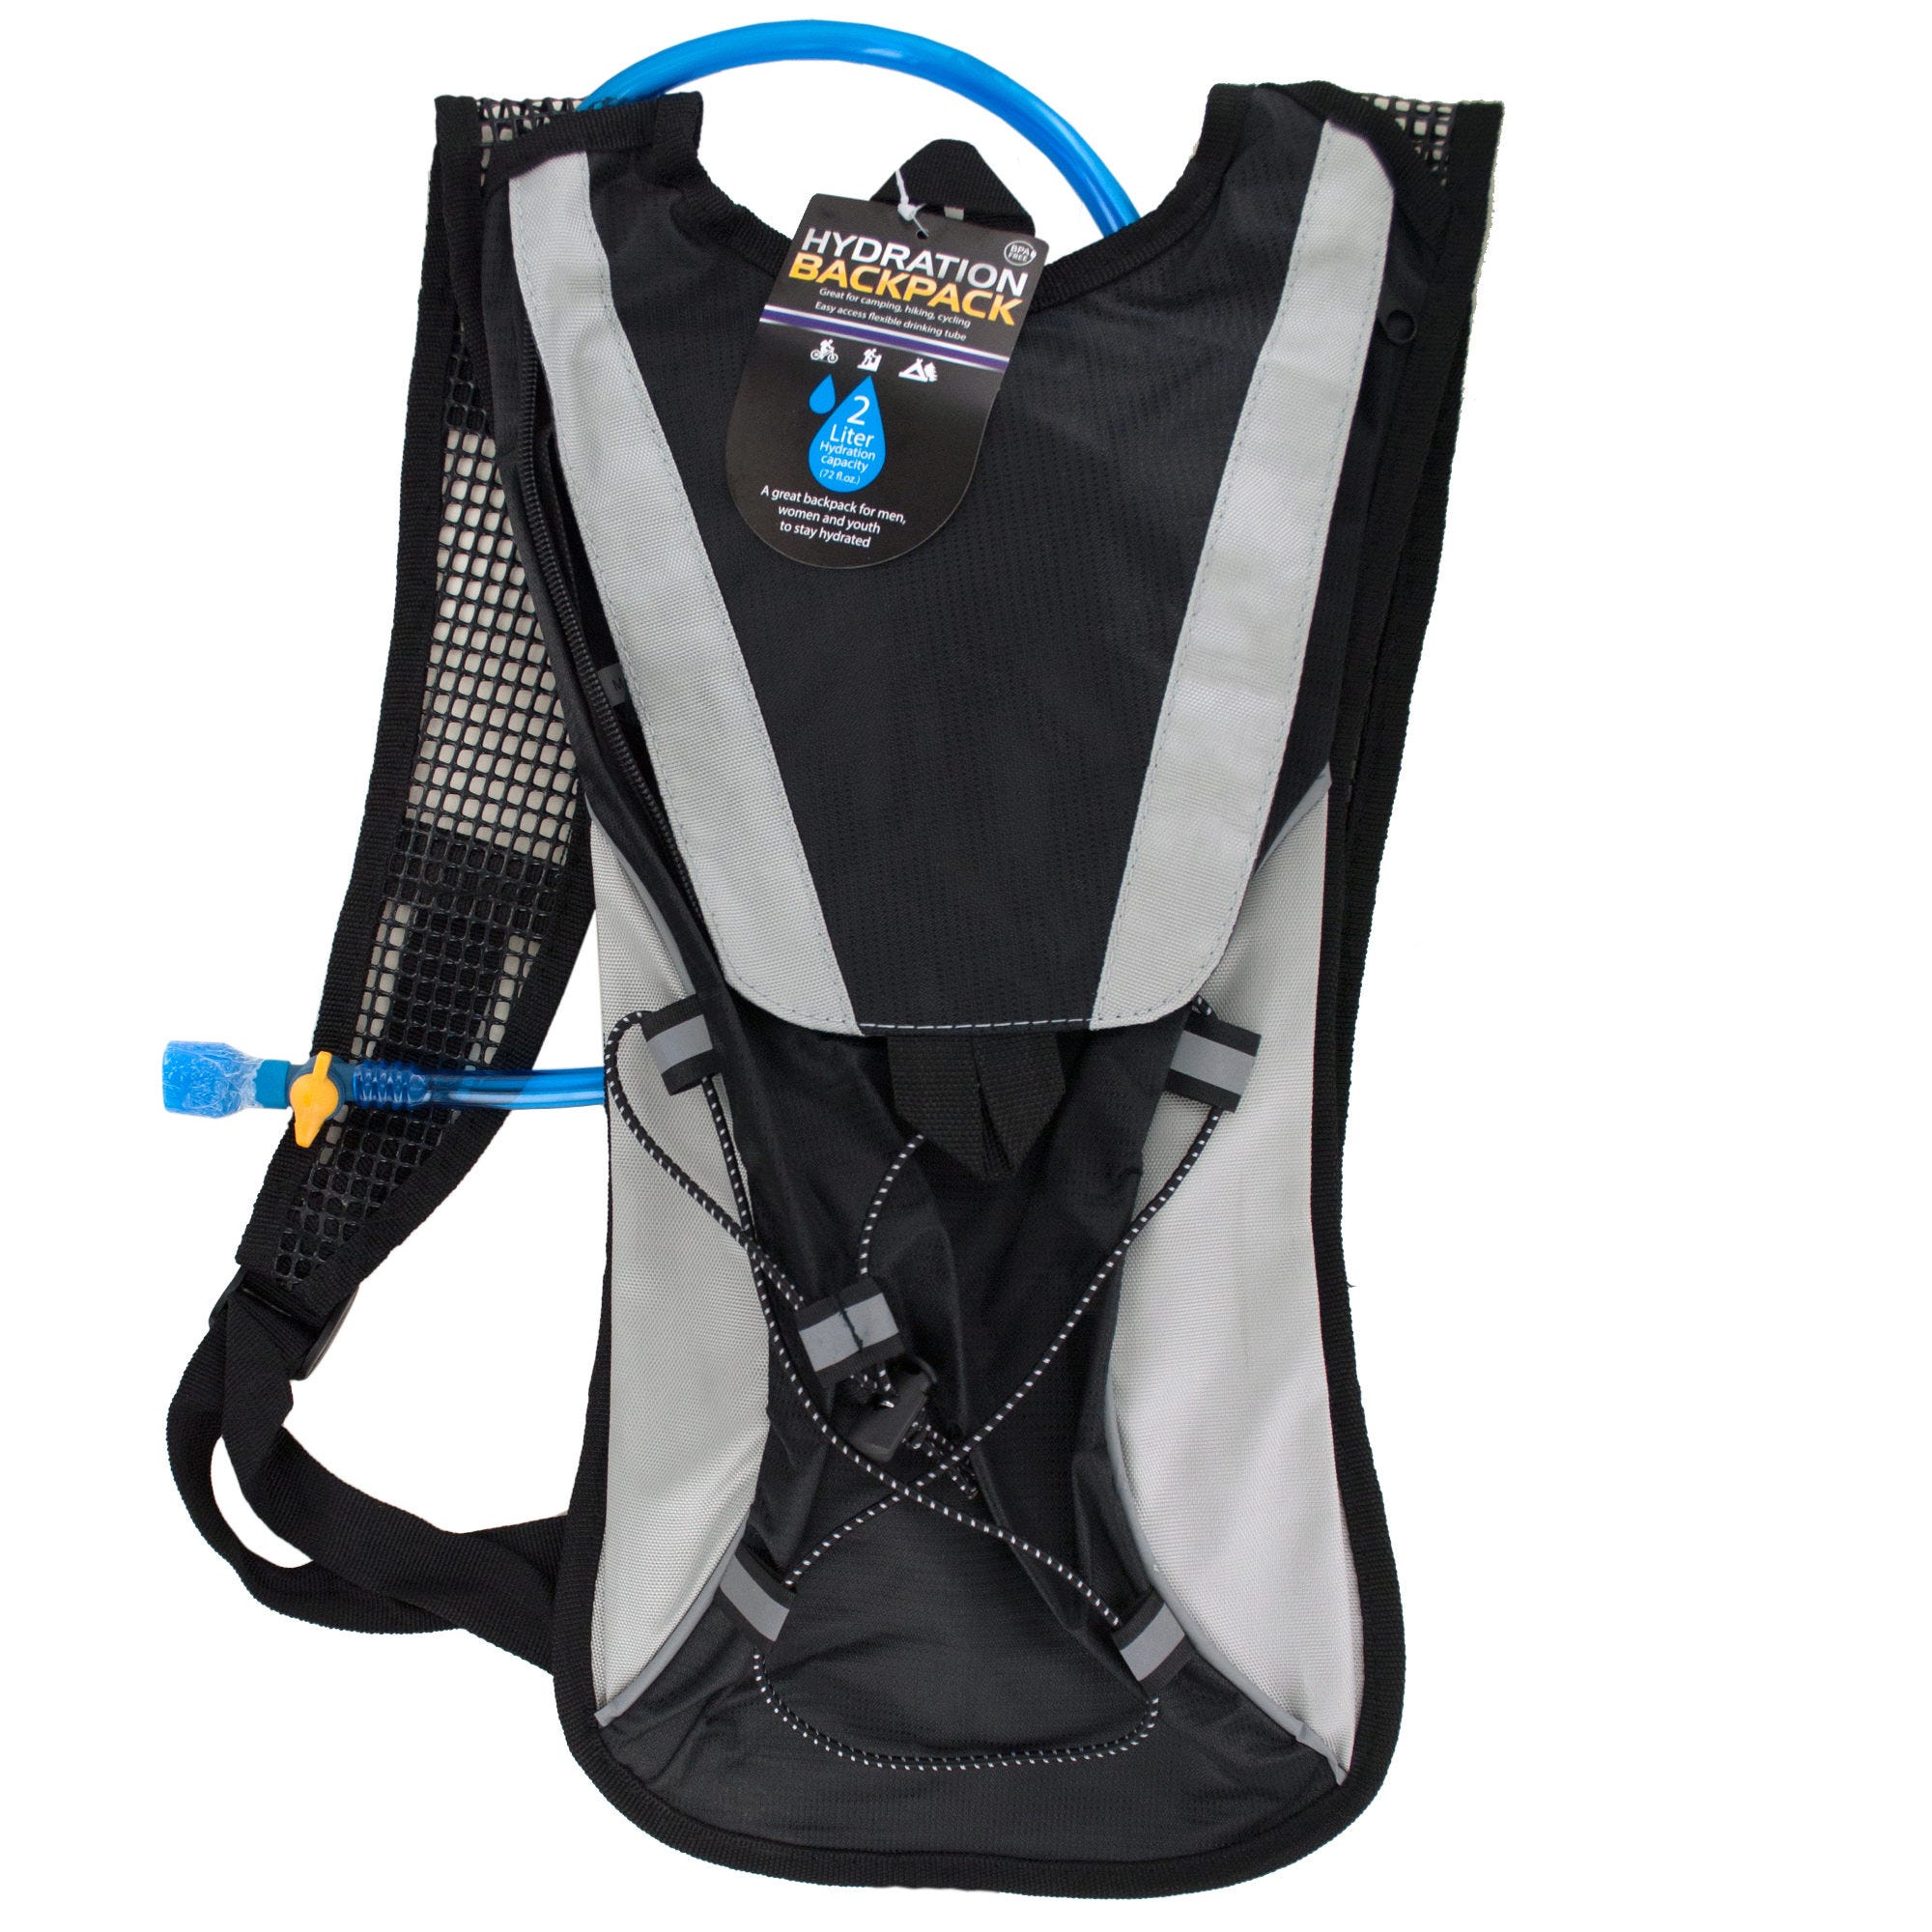 2 Liter Hydration Backpack with Flexible Drinking Tube - Qty 2